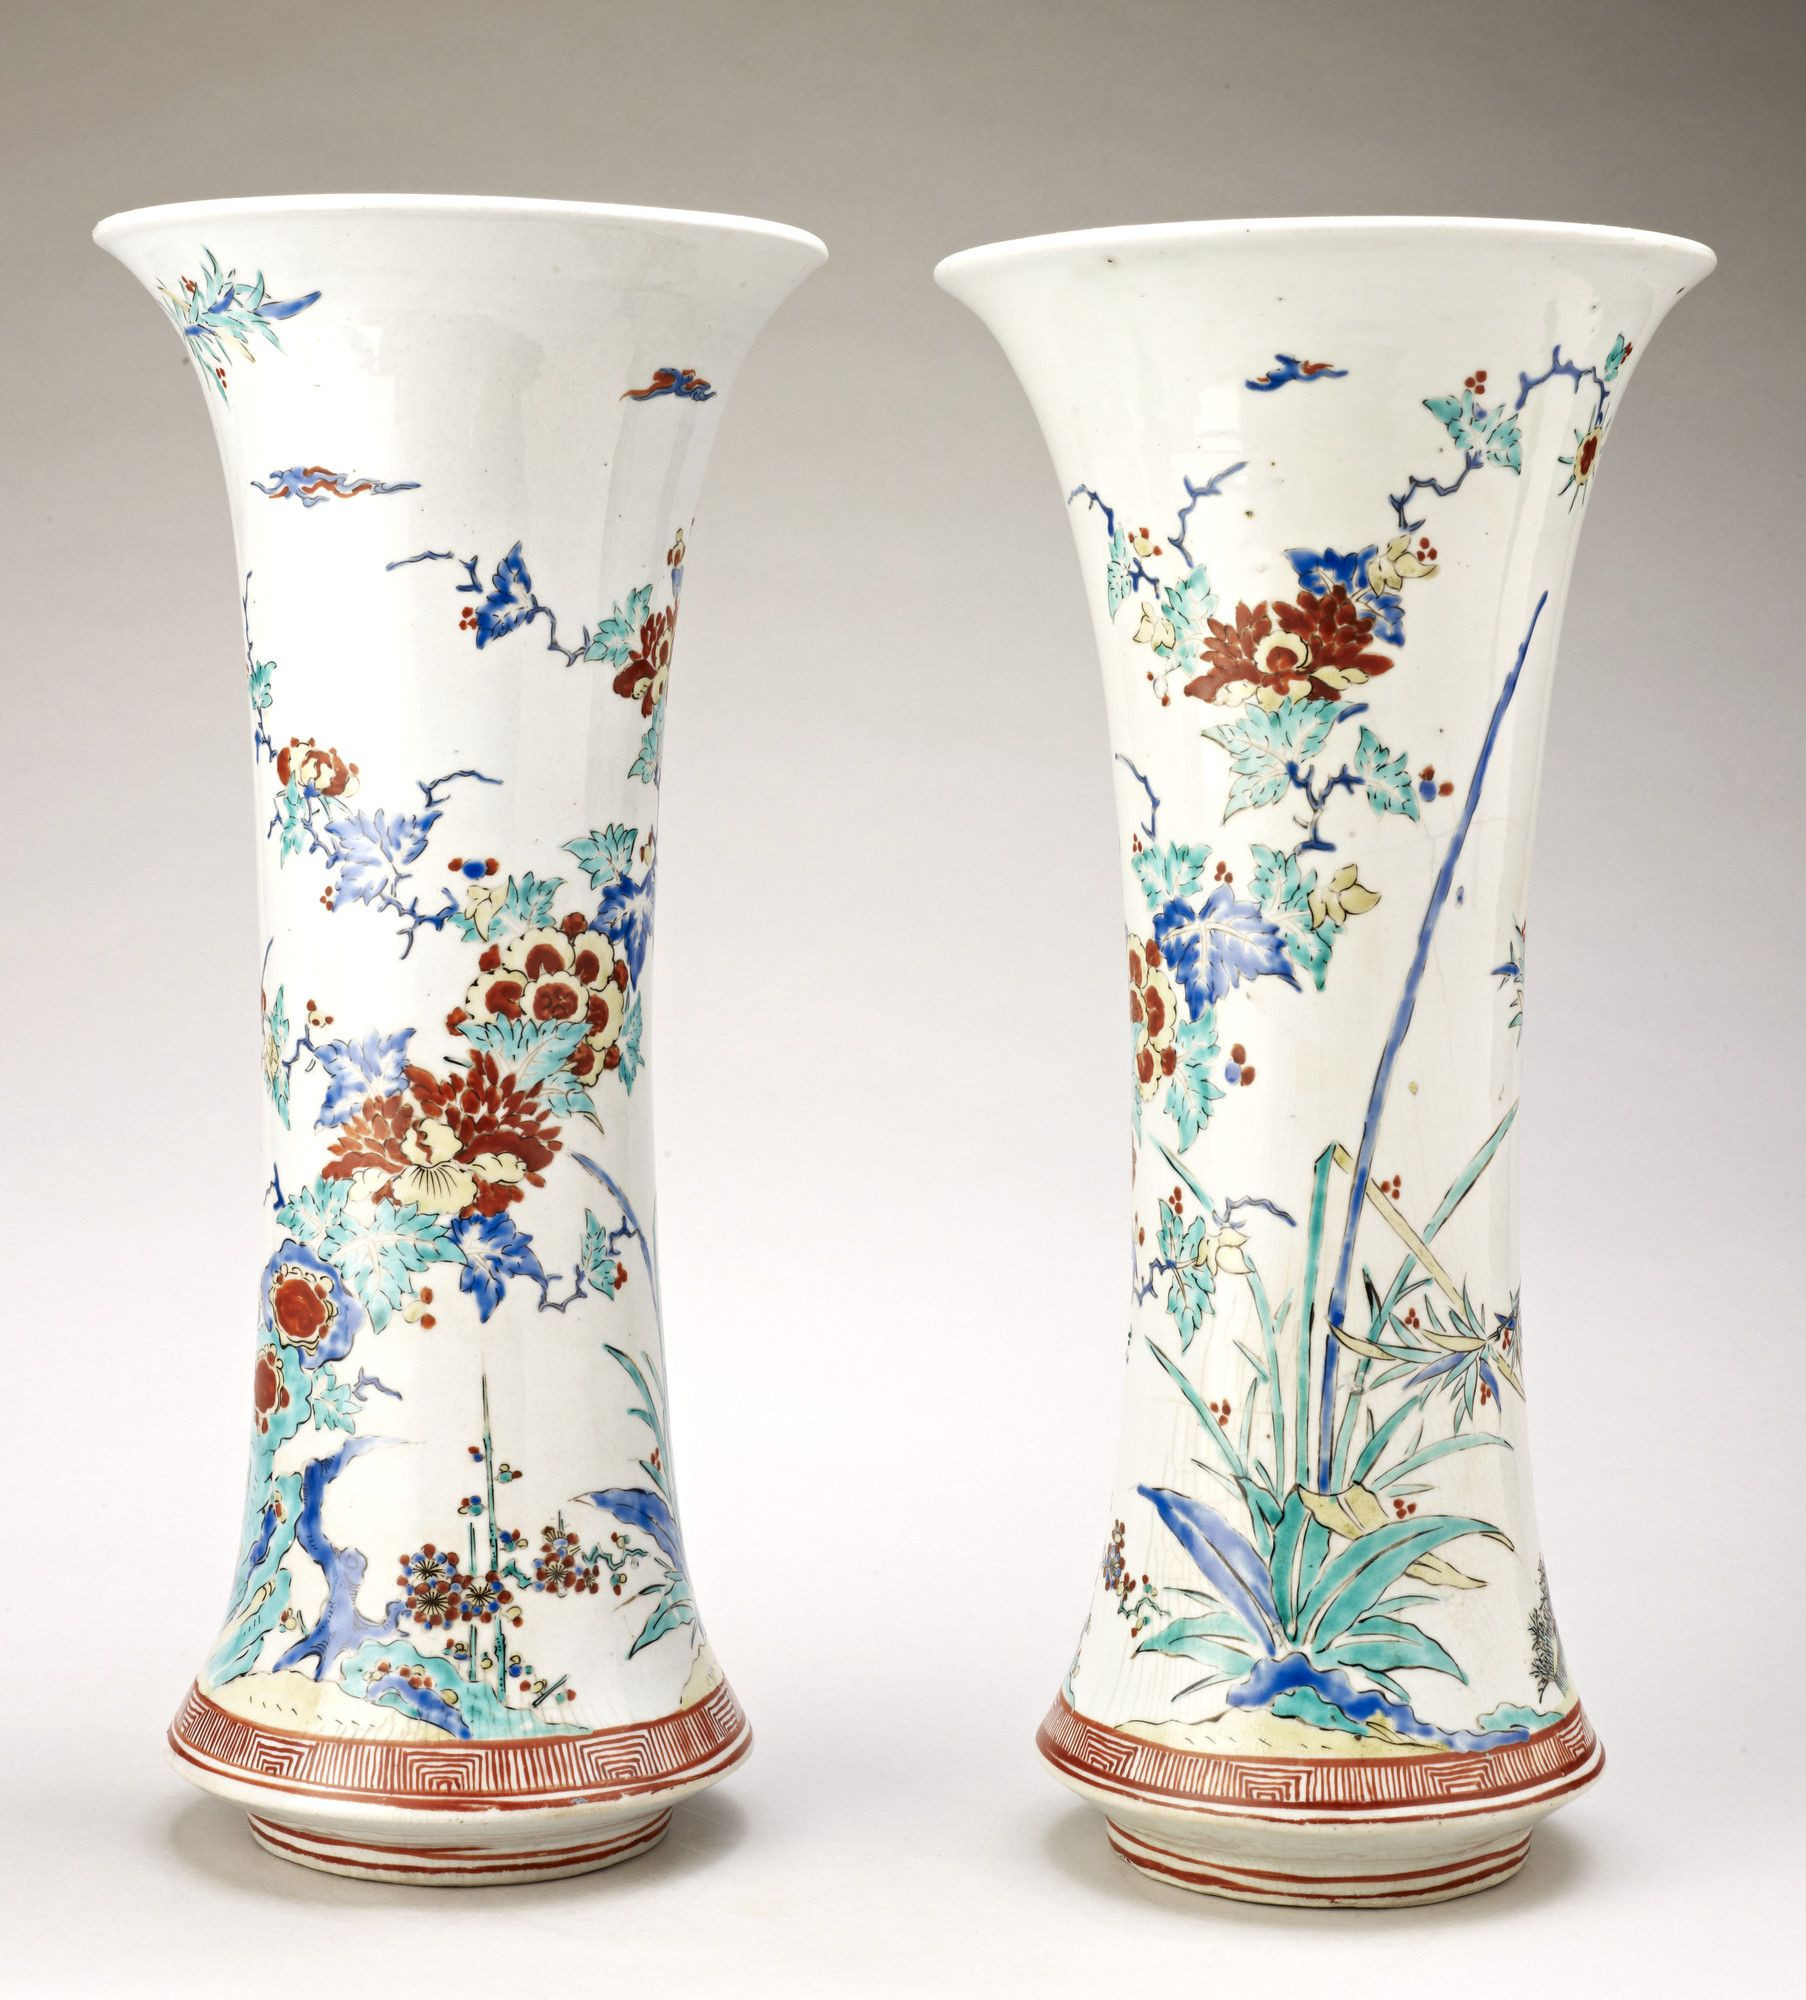 17 Awesome Middle Kingdom Porcelain Vases 2024 free download middle kingdom porcelain vases of a pair of trumpet shaped vases with flaring mouths expanding for a pair of trumpet shaped vases with flaring mouths expanding towards base then sharply rest